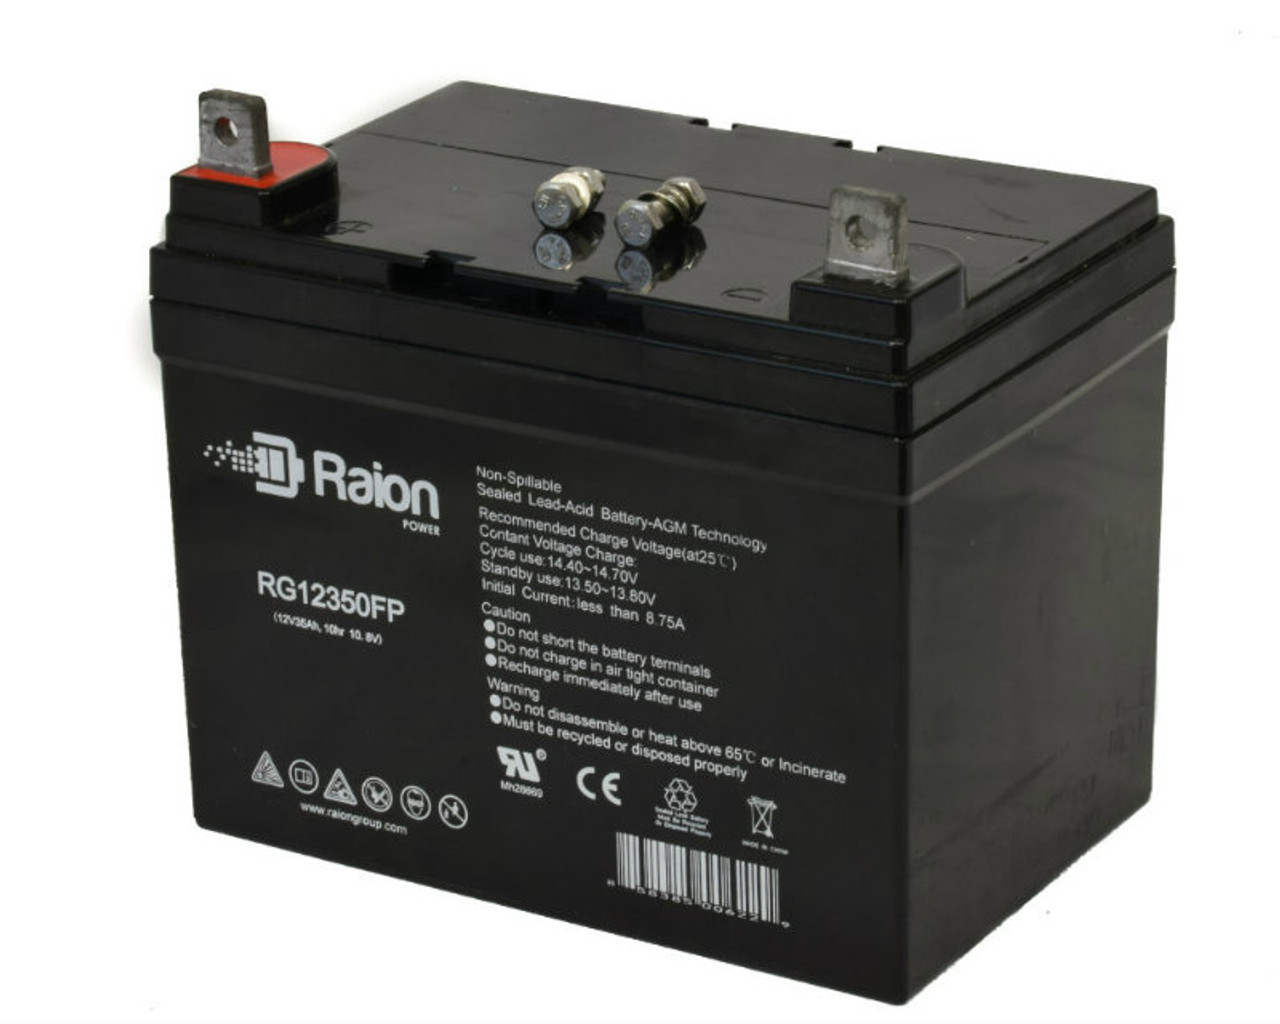 Raion Power Replacement 12V 35Ah RG12350FP Battery for Kweight Power KW 12-30